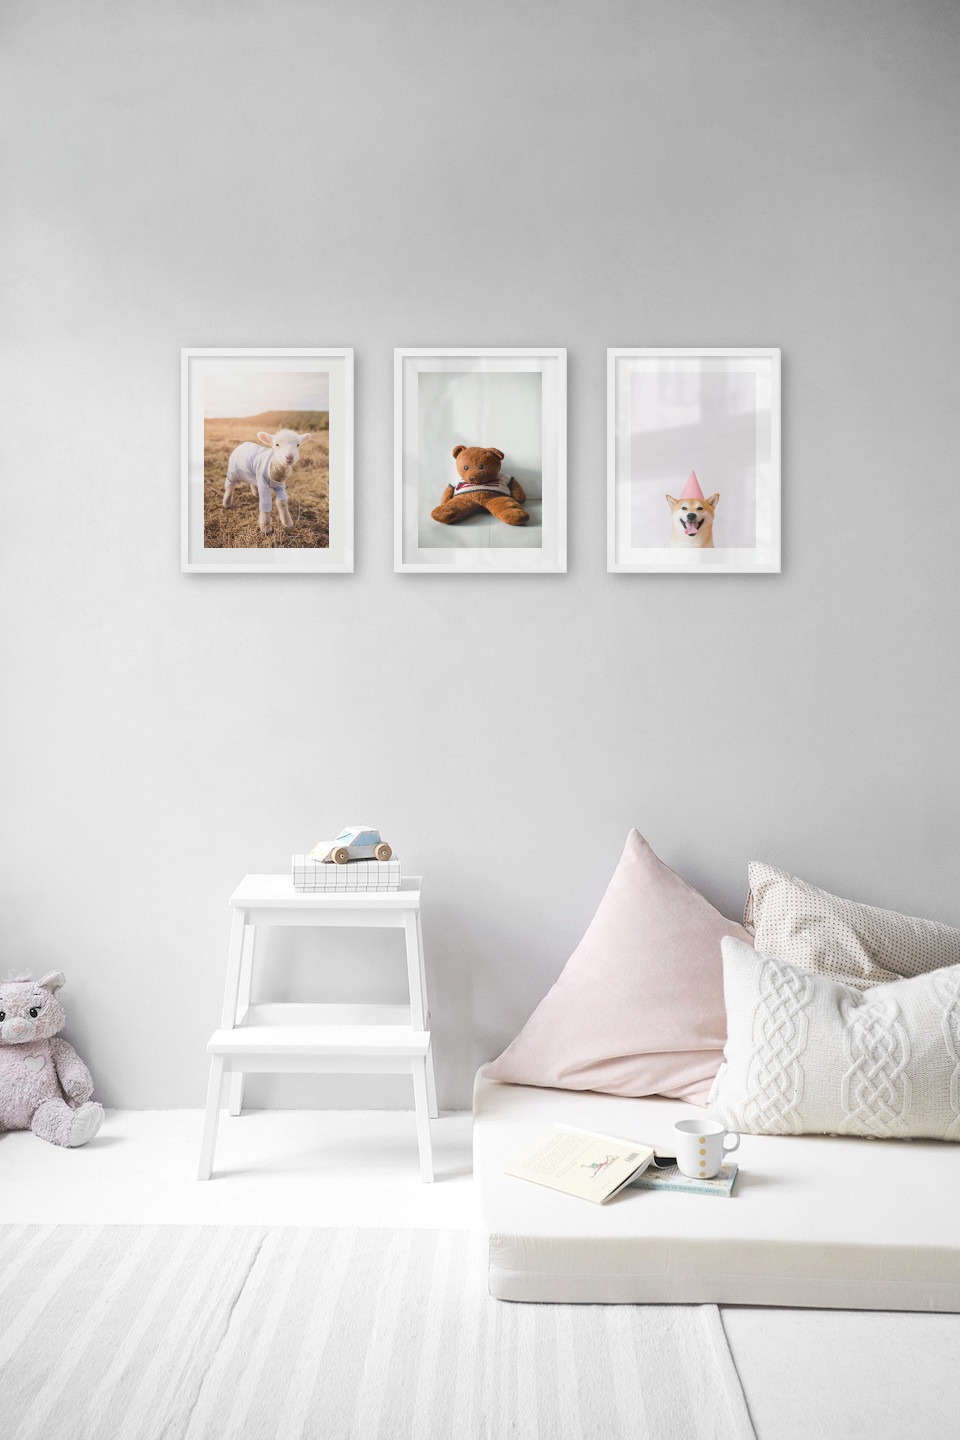 Gallery wall with picture frames in white in sizes 30x40 with prints "Lamb", "Brown teddy bear" and "Dog with pink hat"